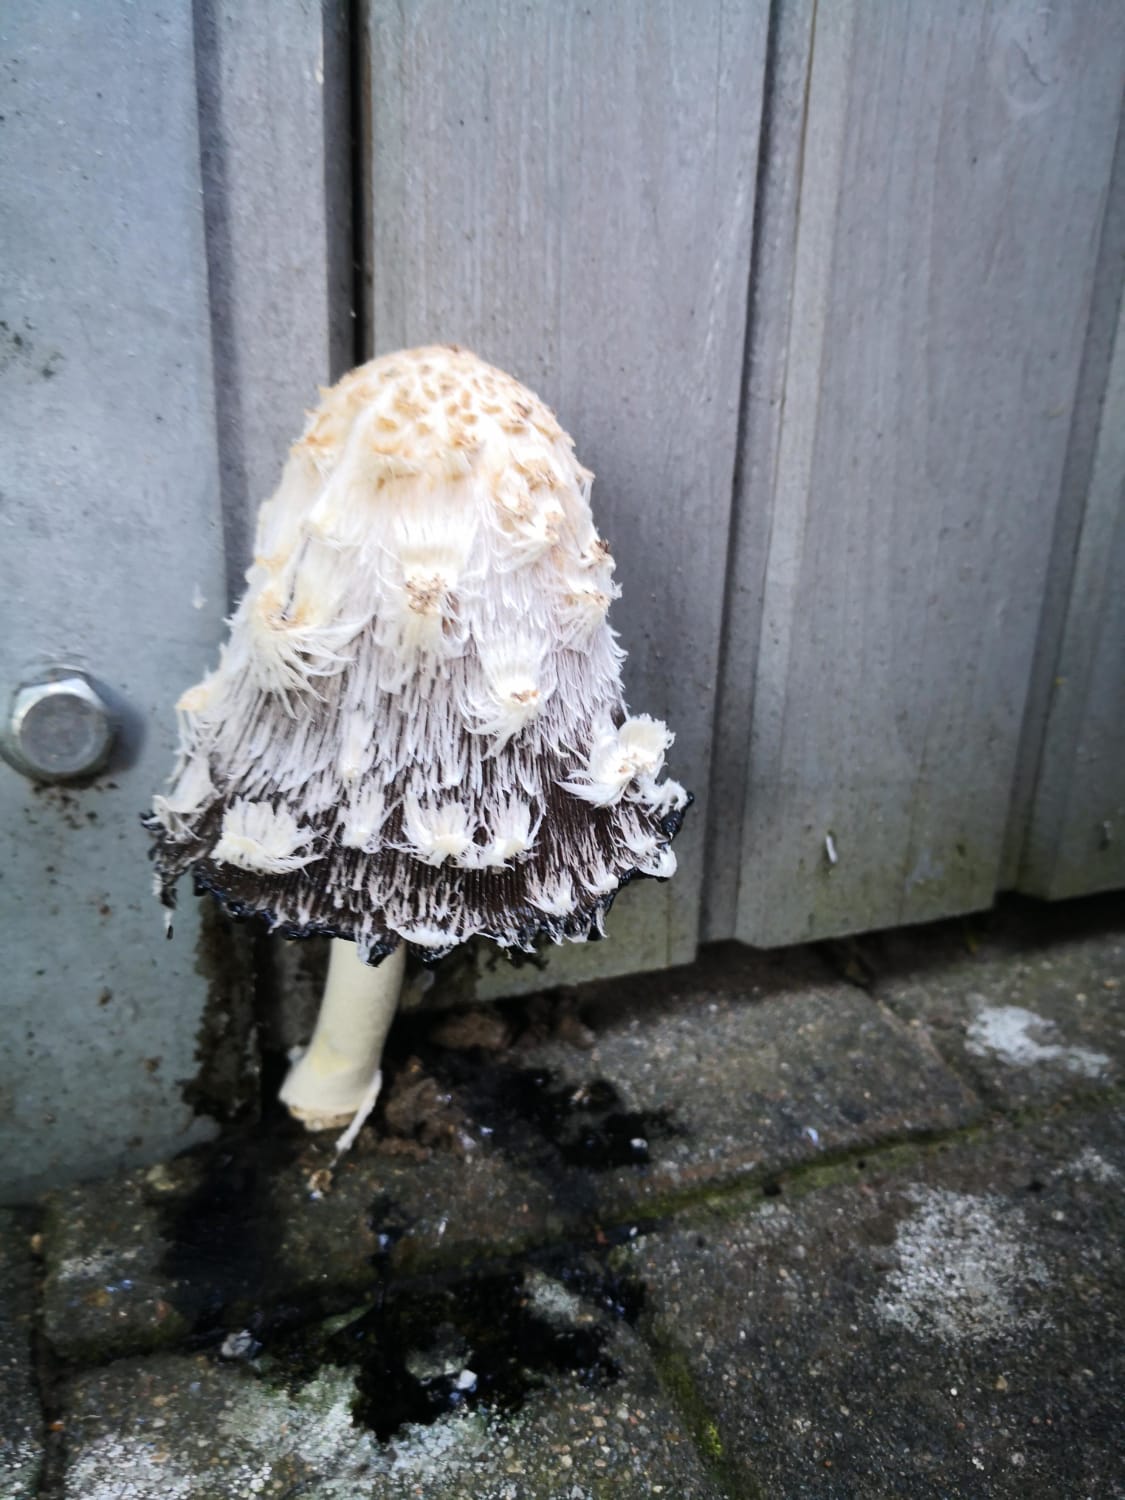 This mushroom at my neighbour's shed